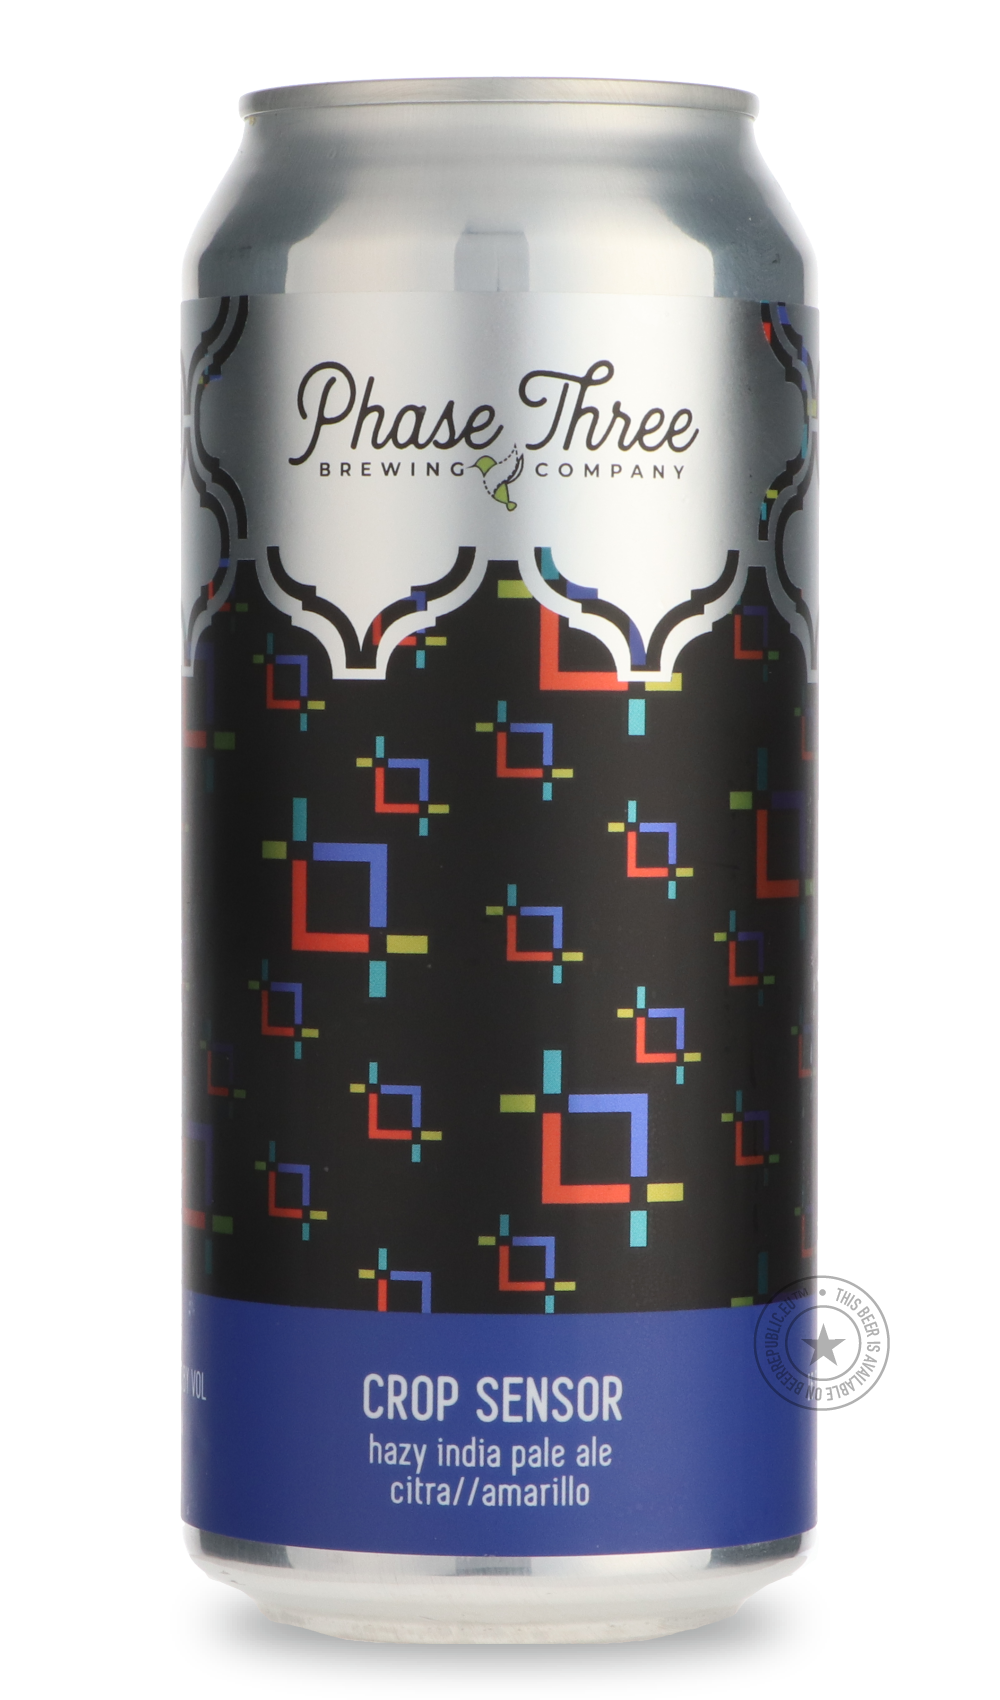 -Phase Three- Crop Sensor-IPA- Only @ Beer Republic - The best online beer store for American & Canadian craft beer - Buy beer online from the USA and Canada - Bier online kopen - Amerikaans bier kopen - Craft beer store - Craft beer kopen - Amerikanisch bier kaufen - Bier online kaufen - Acheter biere online - IPA - Stout - Porter - New England IPA - Hazy IPA - Imperial Stout - Barrel Aged - Barrel Aged Imperial Stout - Brown - Dark beer - Blond - Blonde - Pilsner - Lager - Wheat - Weizen - Amber - Barley 